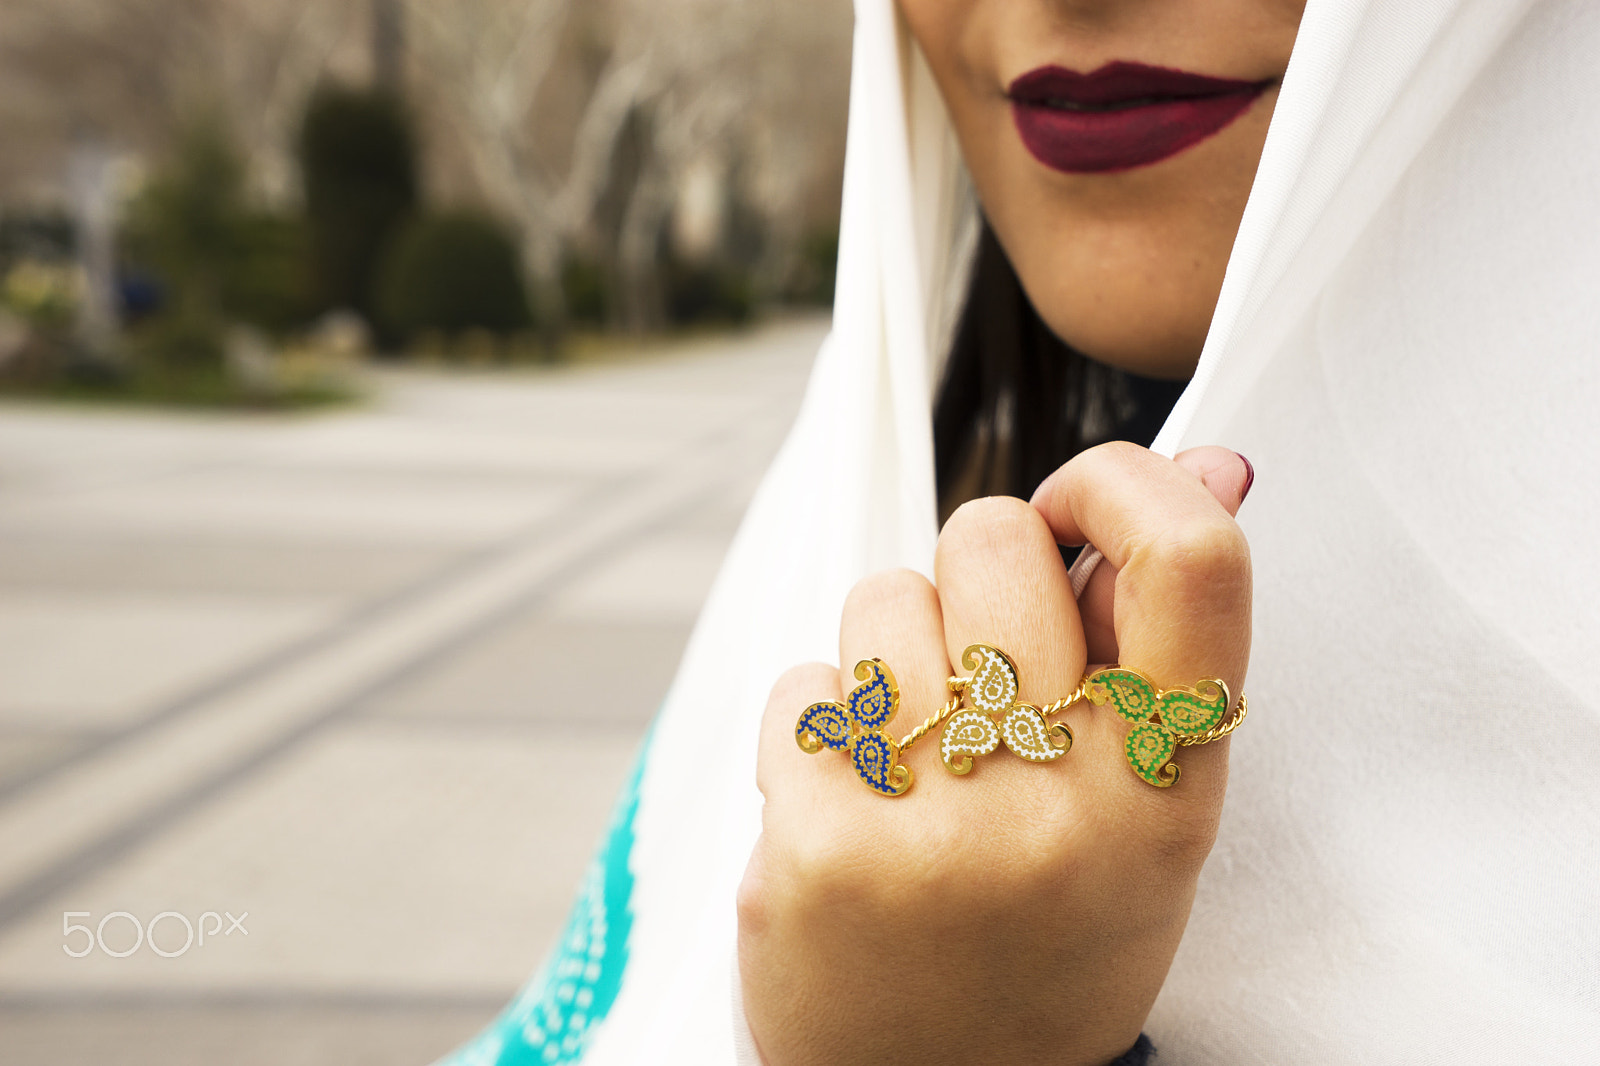 Sony a7 sample photo. Beautiful girl with turkish headscarves and gold antique jewellery photography